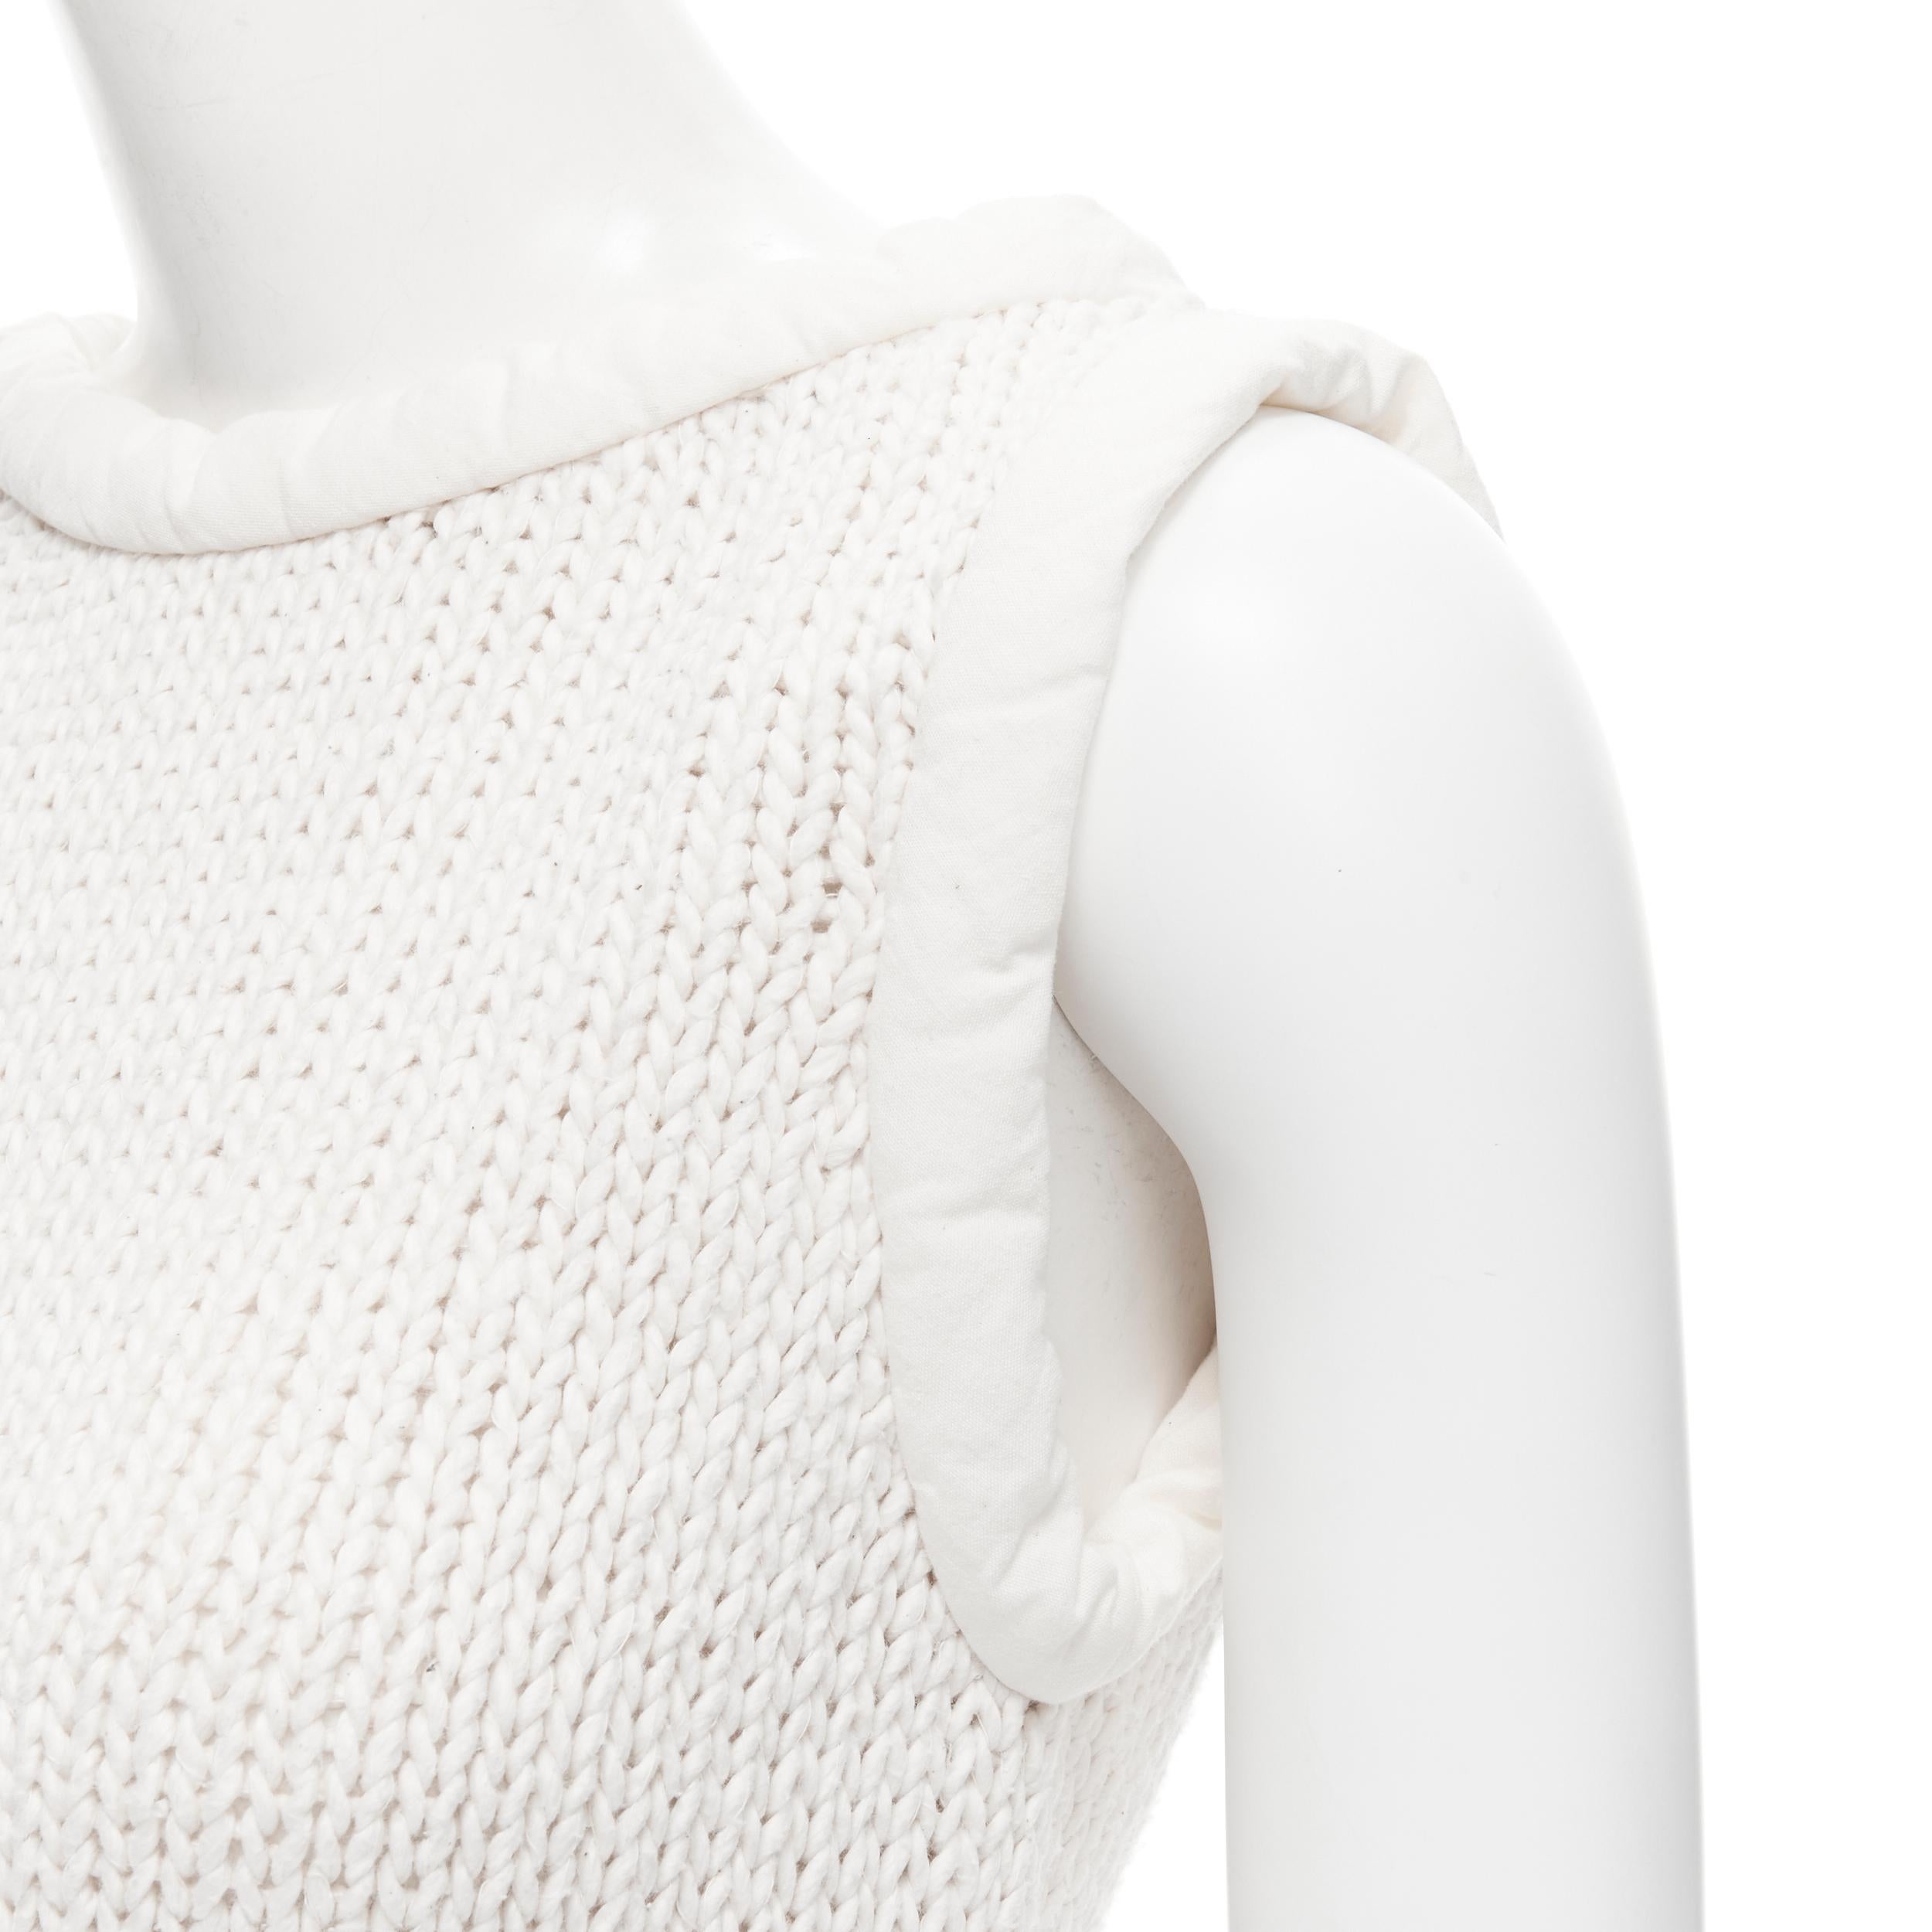 OLD CELINE Phoebe Philo white hand knit padded trim tunic vest XS 
Reference: TGAS/B01873 
Brand: Celine 
Designer: Phoebe Philo 
Material: Cotton 
Color: White 
Pattern: Solid 
Extra Detail: Padded tubular trimming at neckline and sleeve. Slit side